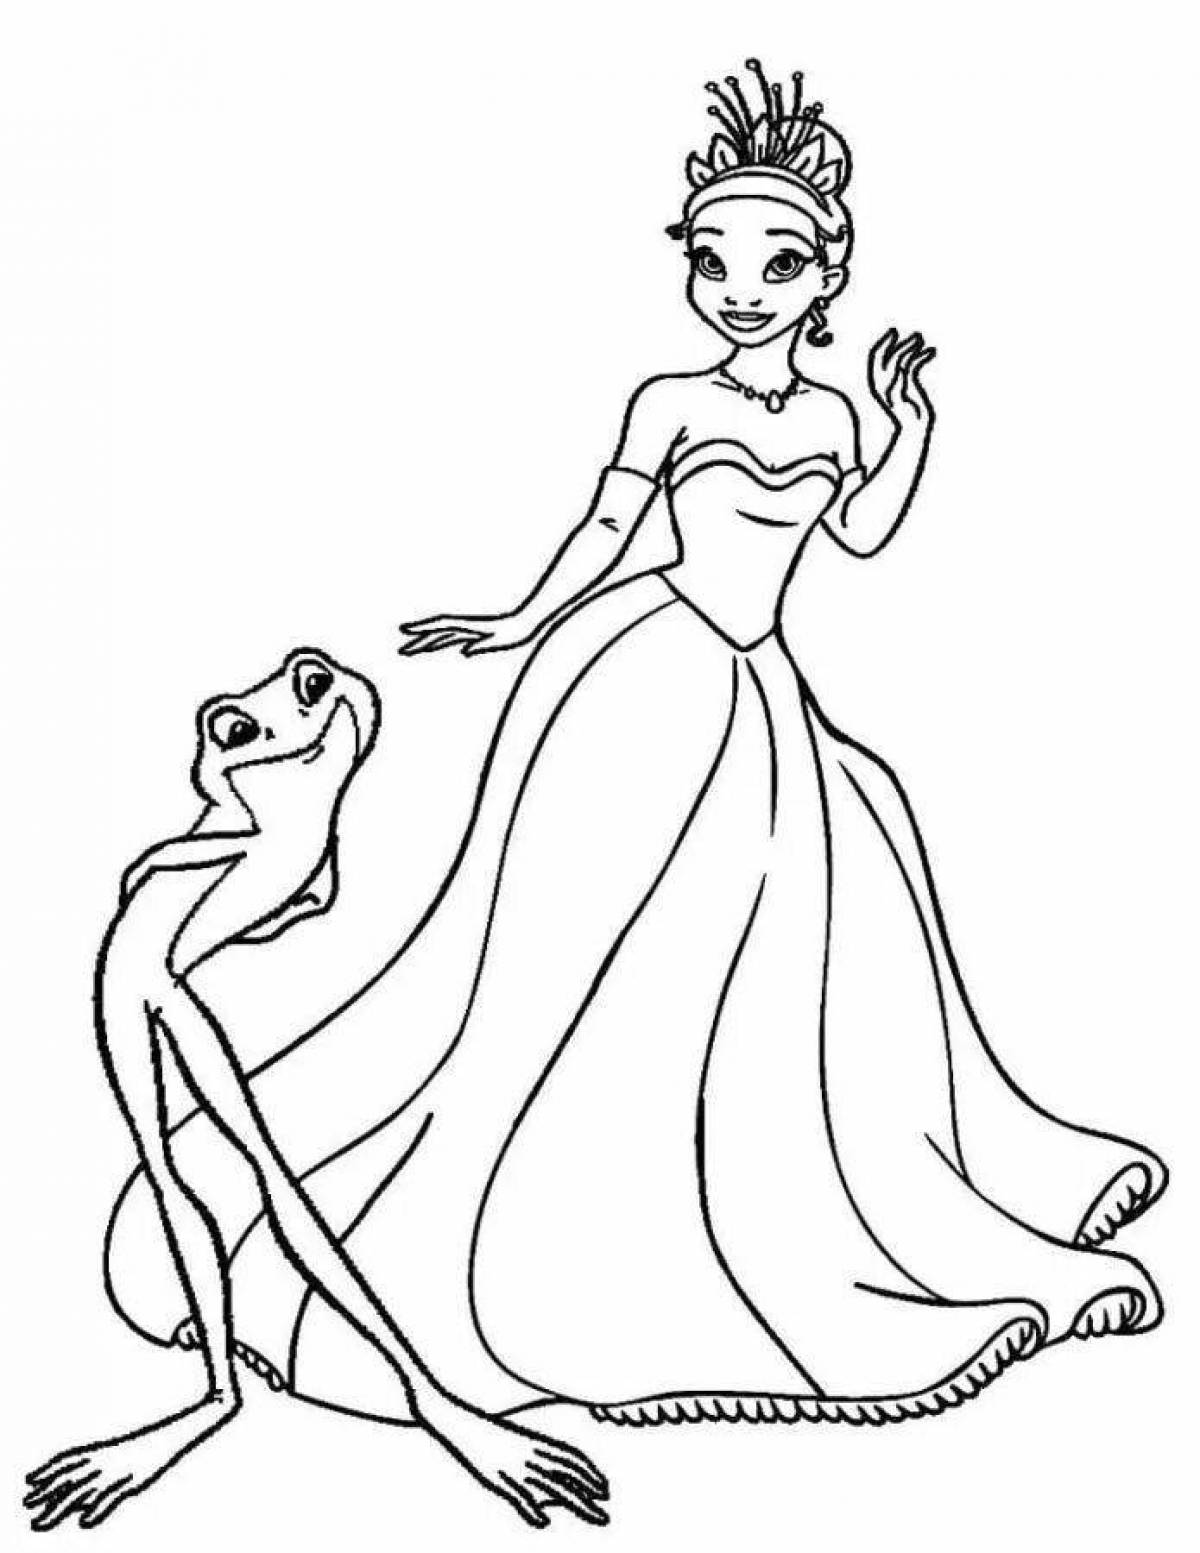 Glamourous frog princess coloring page